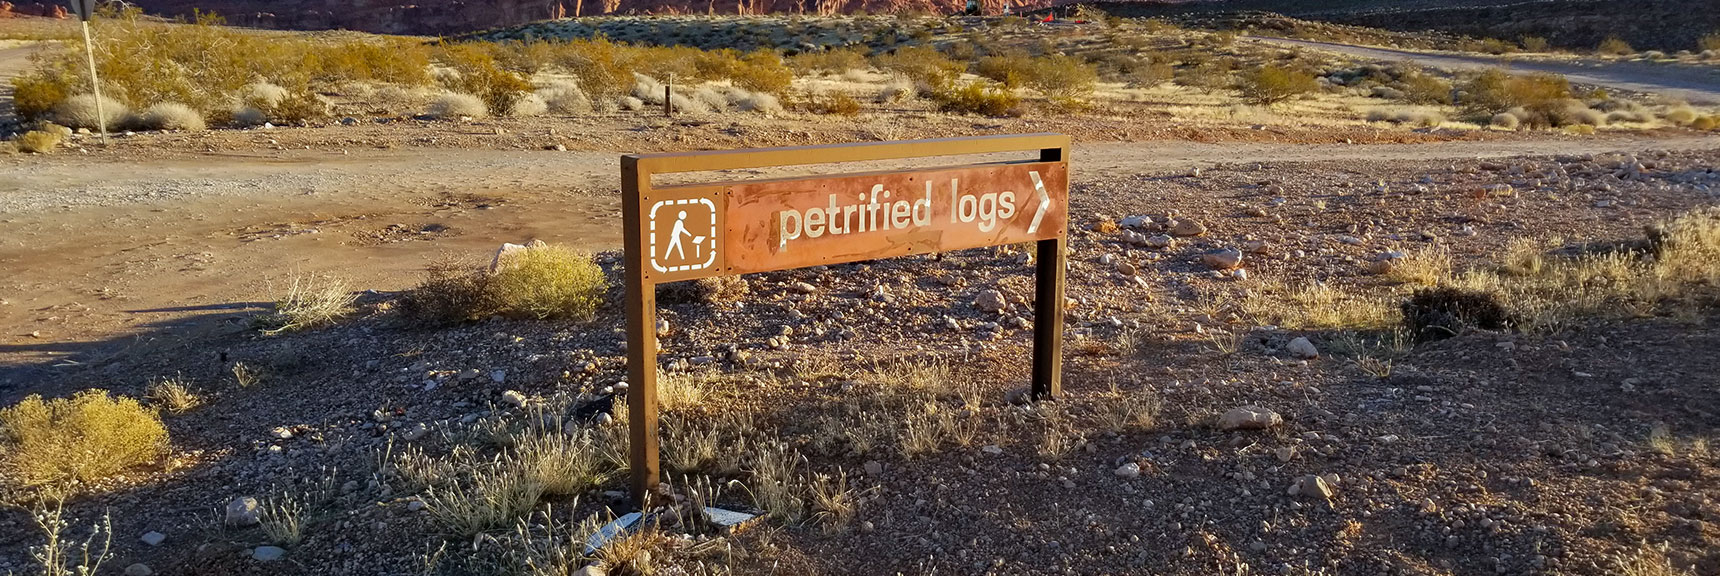 Entrance to Petrified Logs Loop in Valley of Fire State Park, Nevada